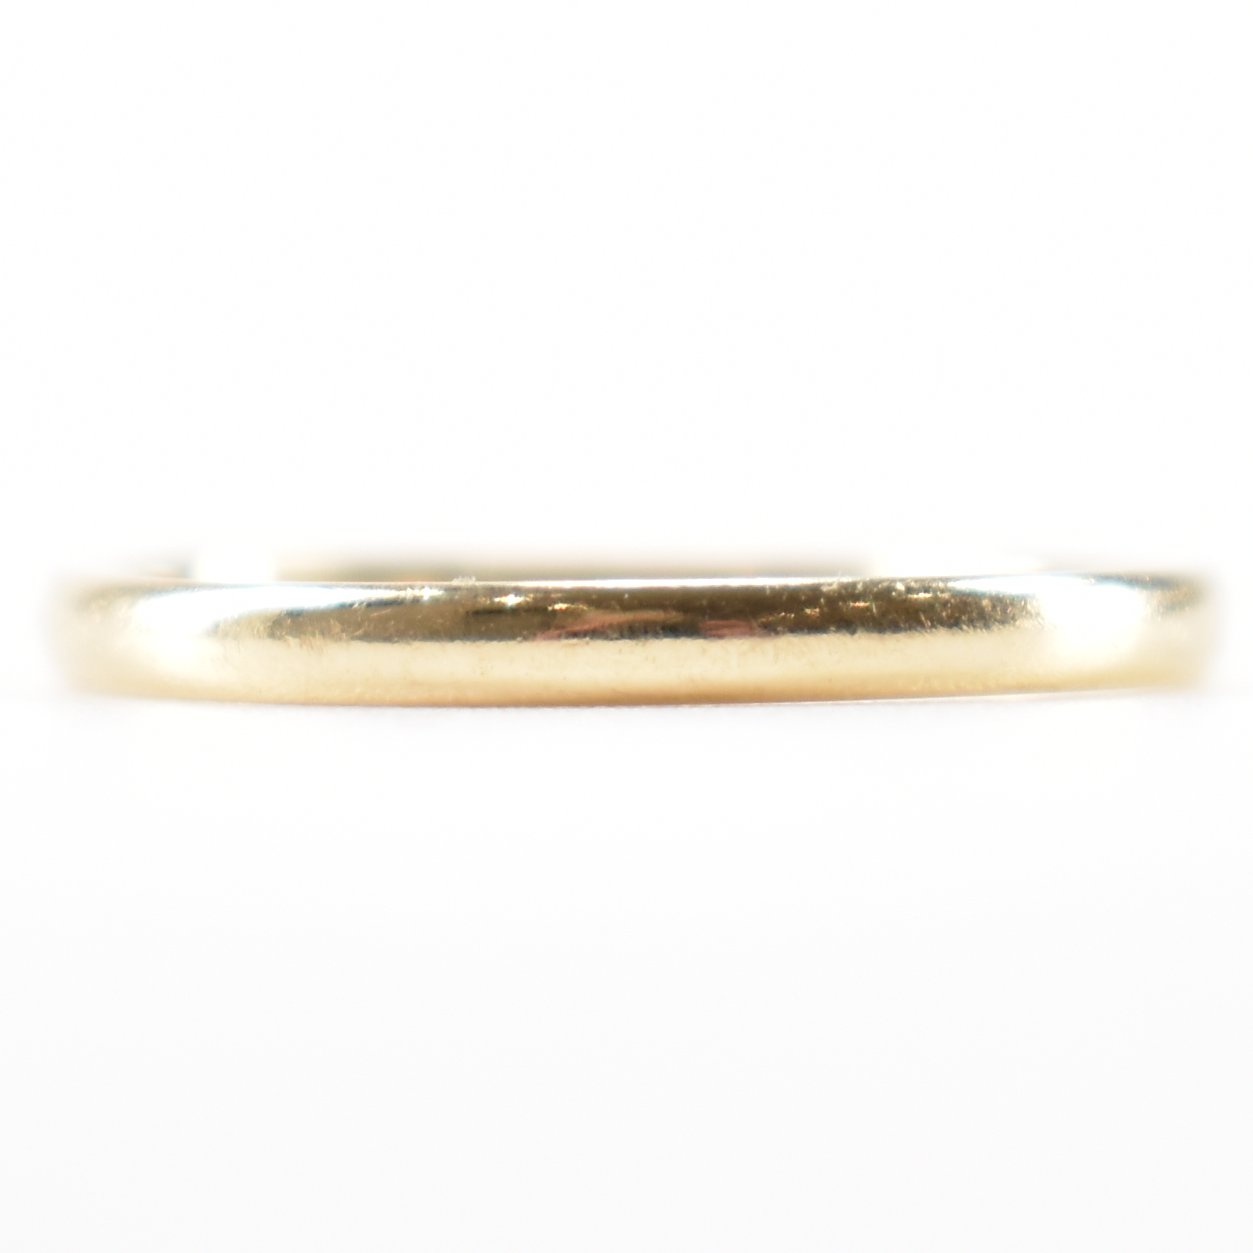 HALLMARKED 9CT GOLD BAND RING - Image 3 of 6